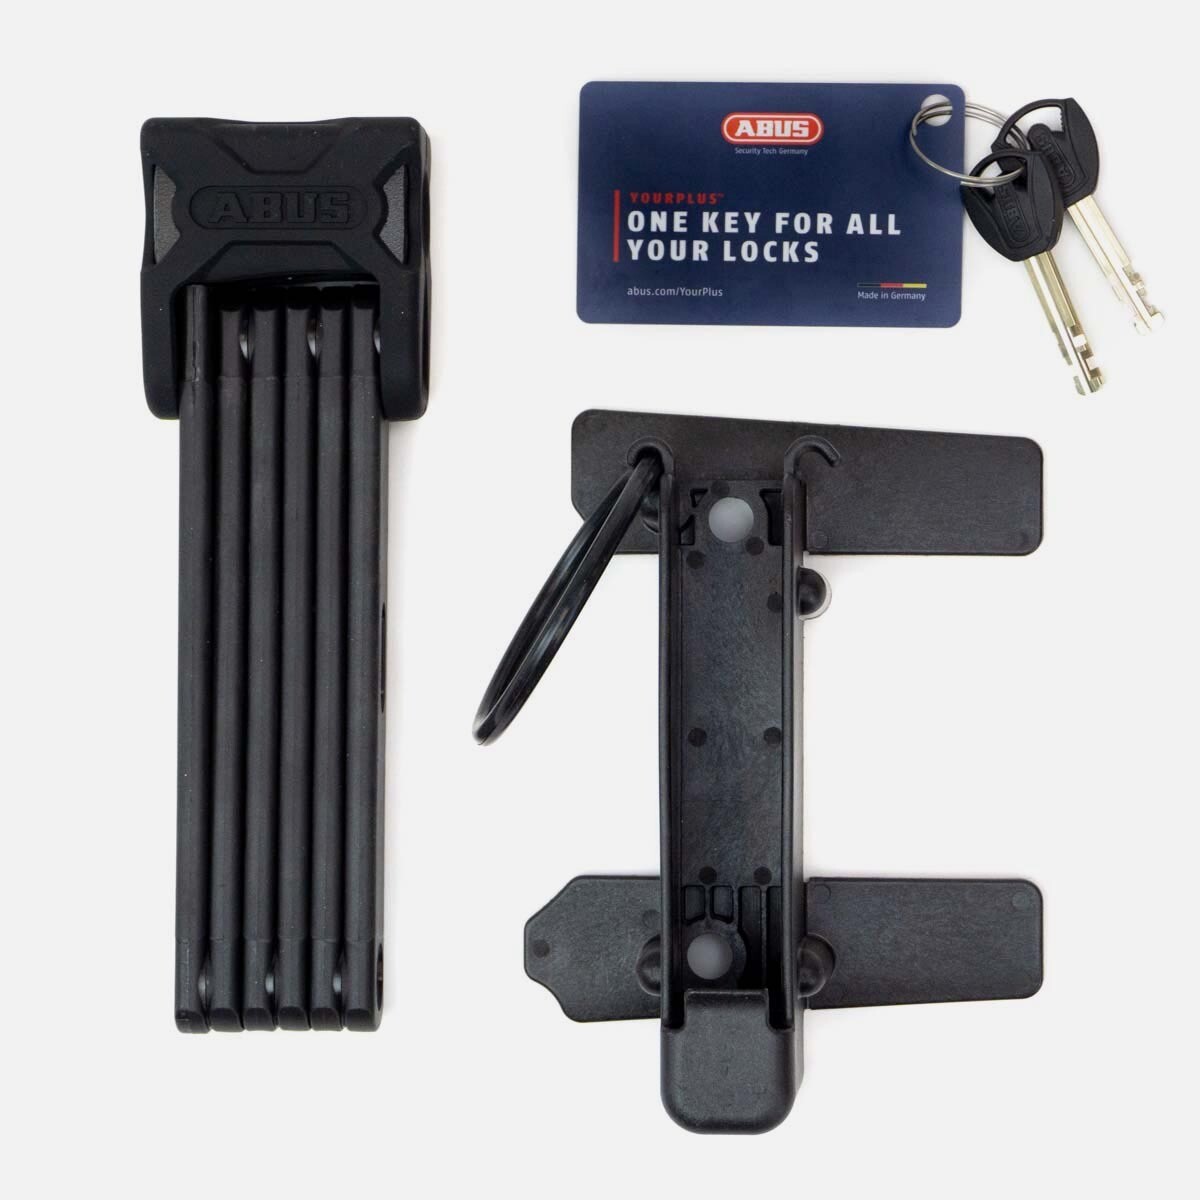 ABUS anti-theft / Gocycle anti-theft + support